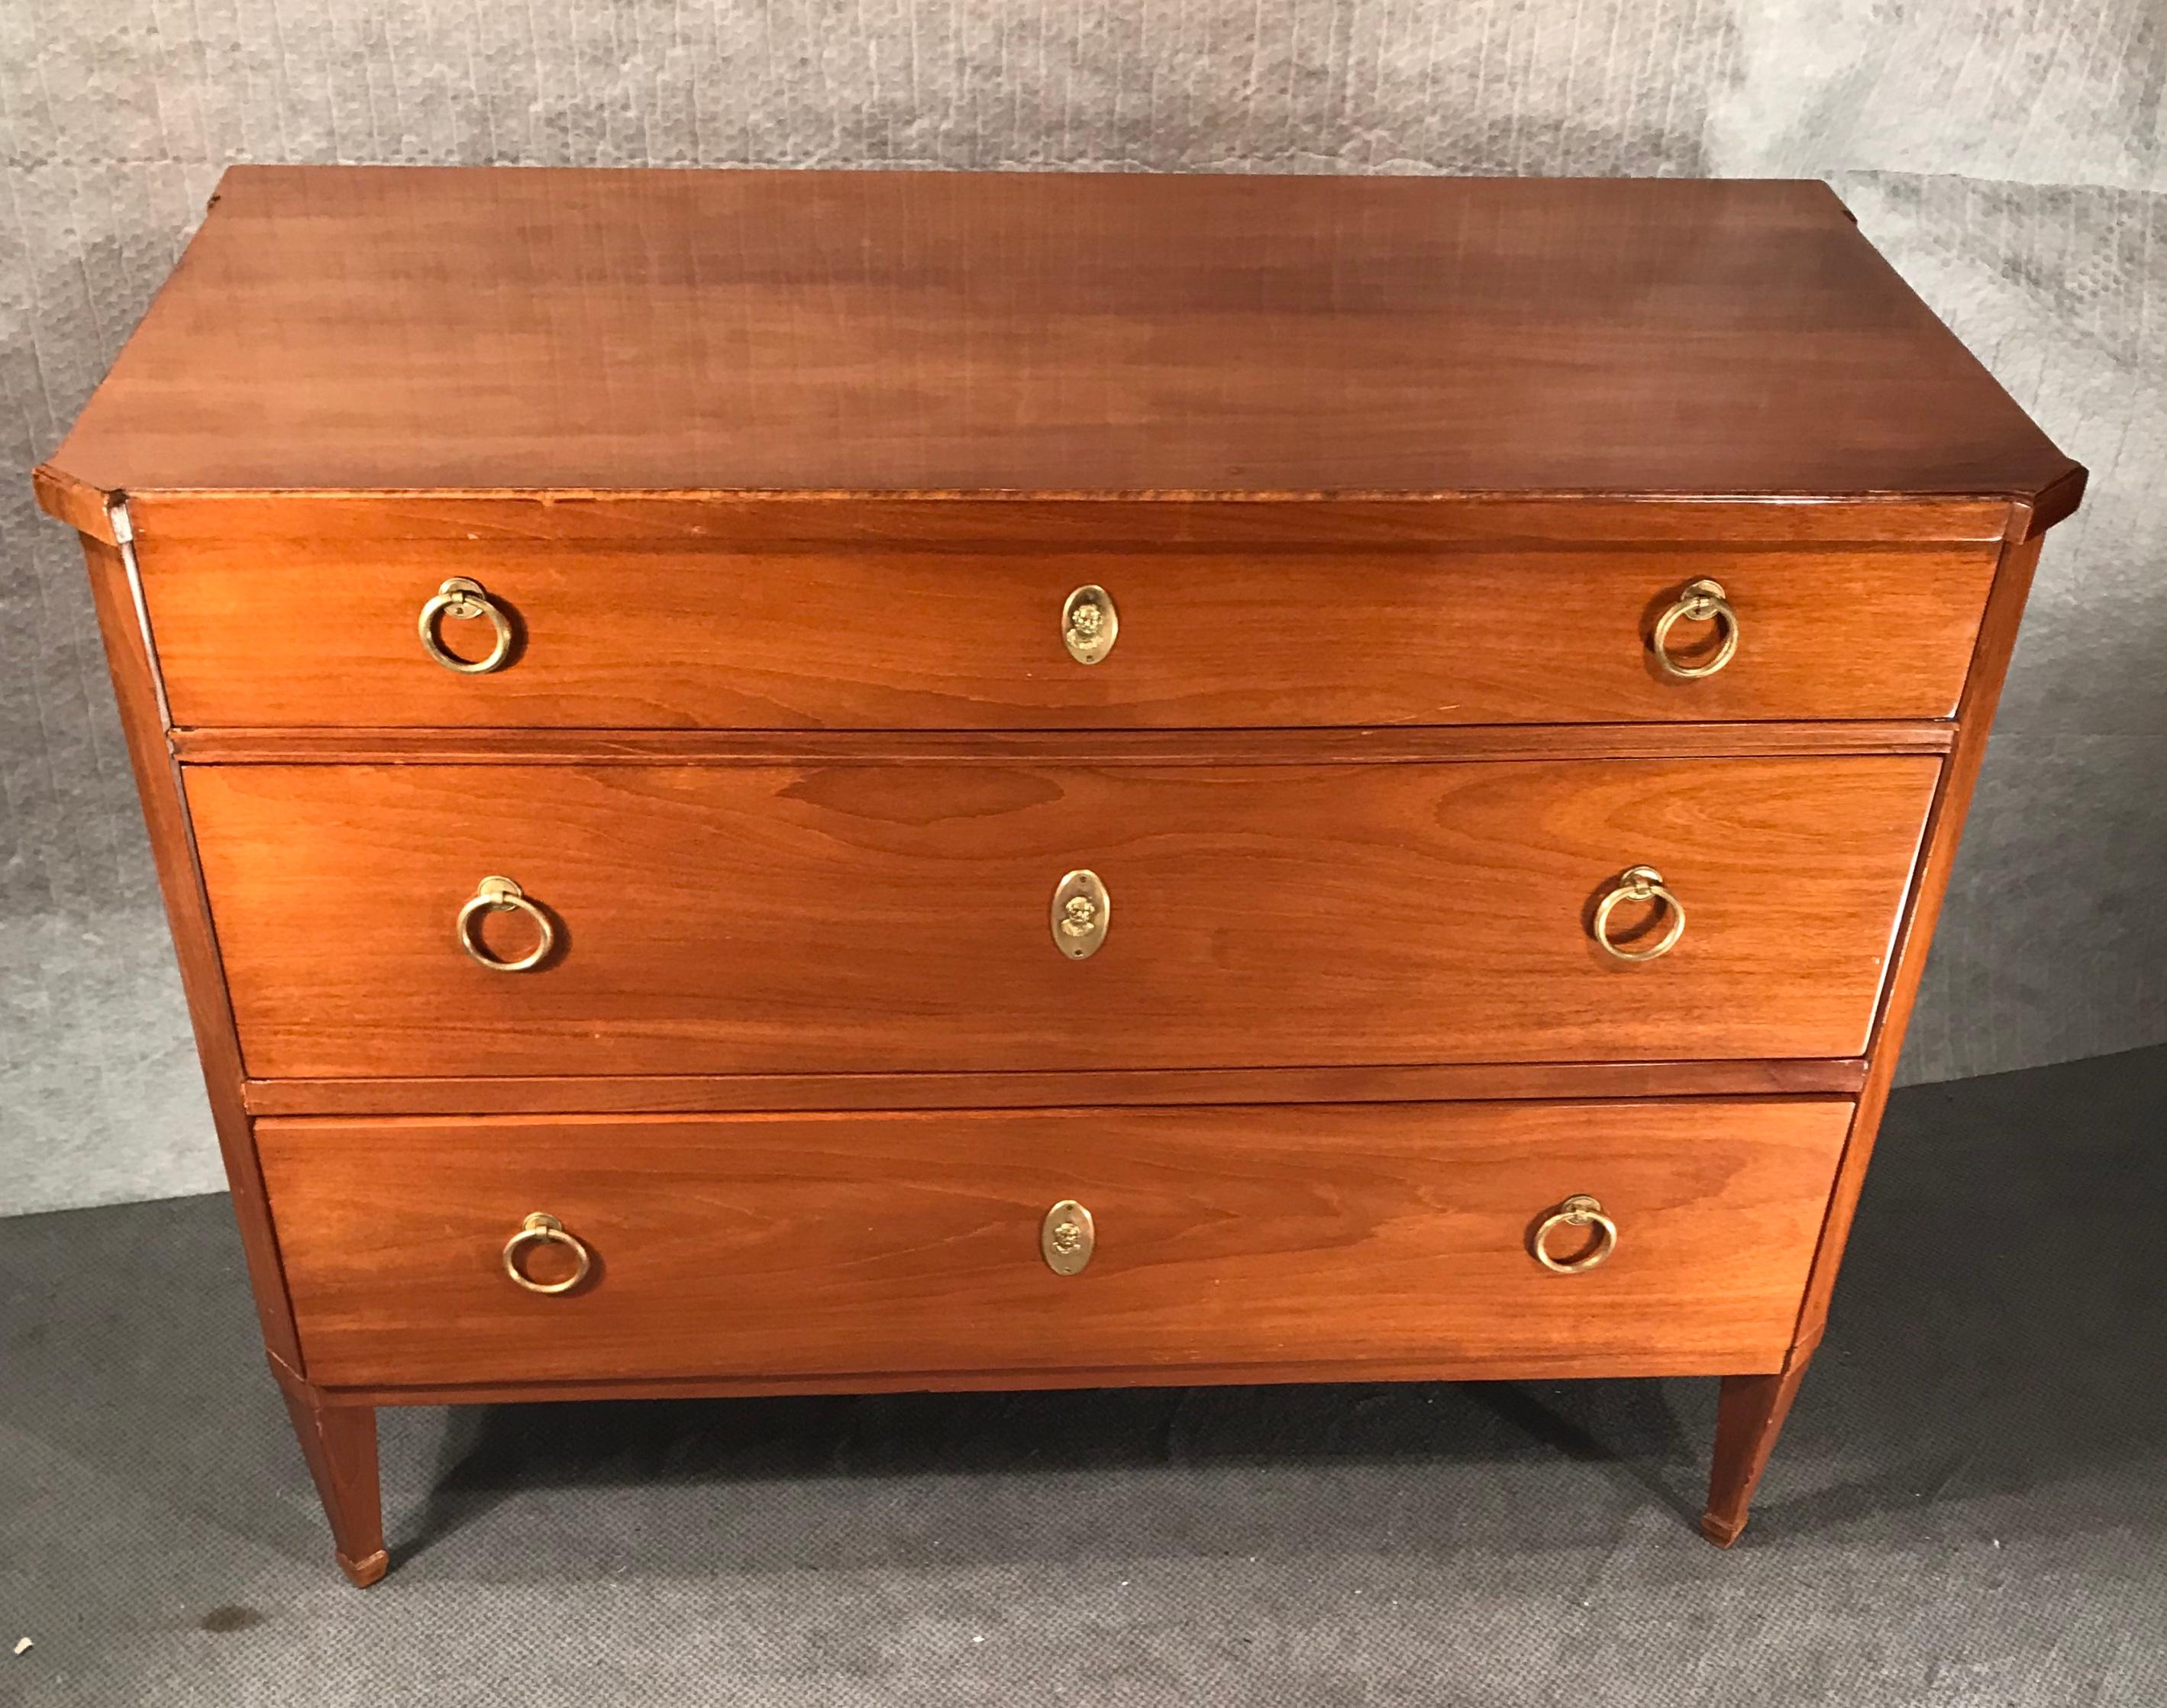 Elegant Louis XVI commode, Munich 1800, bleached mahogany veneer, beautiful original brass fittings. The commode is in very good condition, it will be shipped from Germany, standard shipping costs to Boston are included.